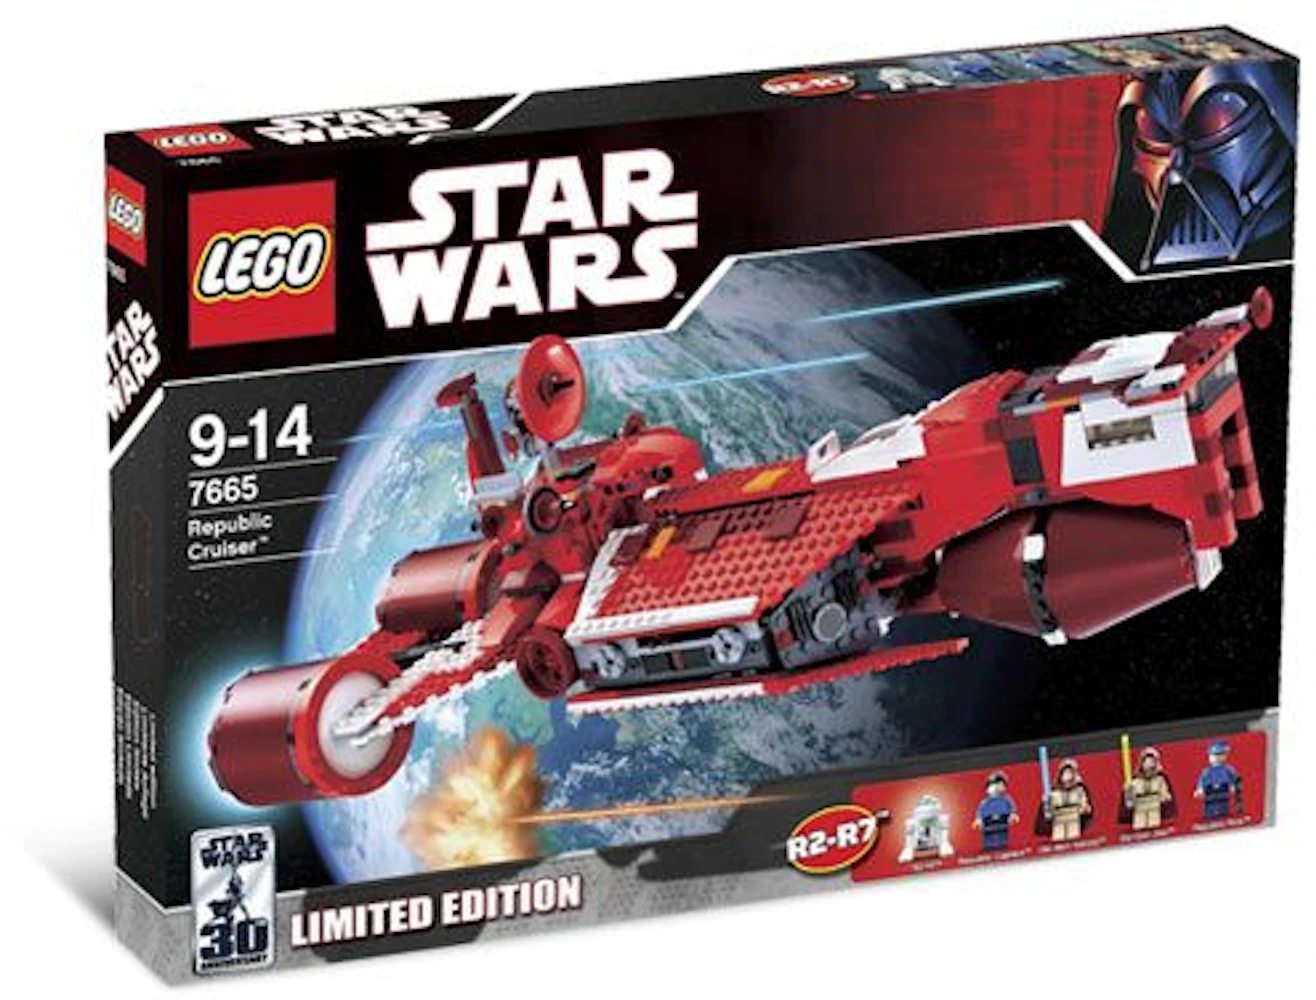 LEGO Star Wars Republic Cruiser Limited Edition with R2-R7 Set Red - SS07 - JP